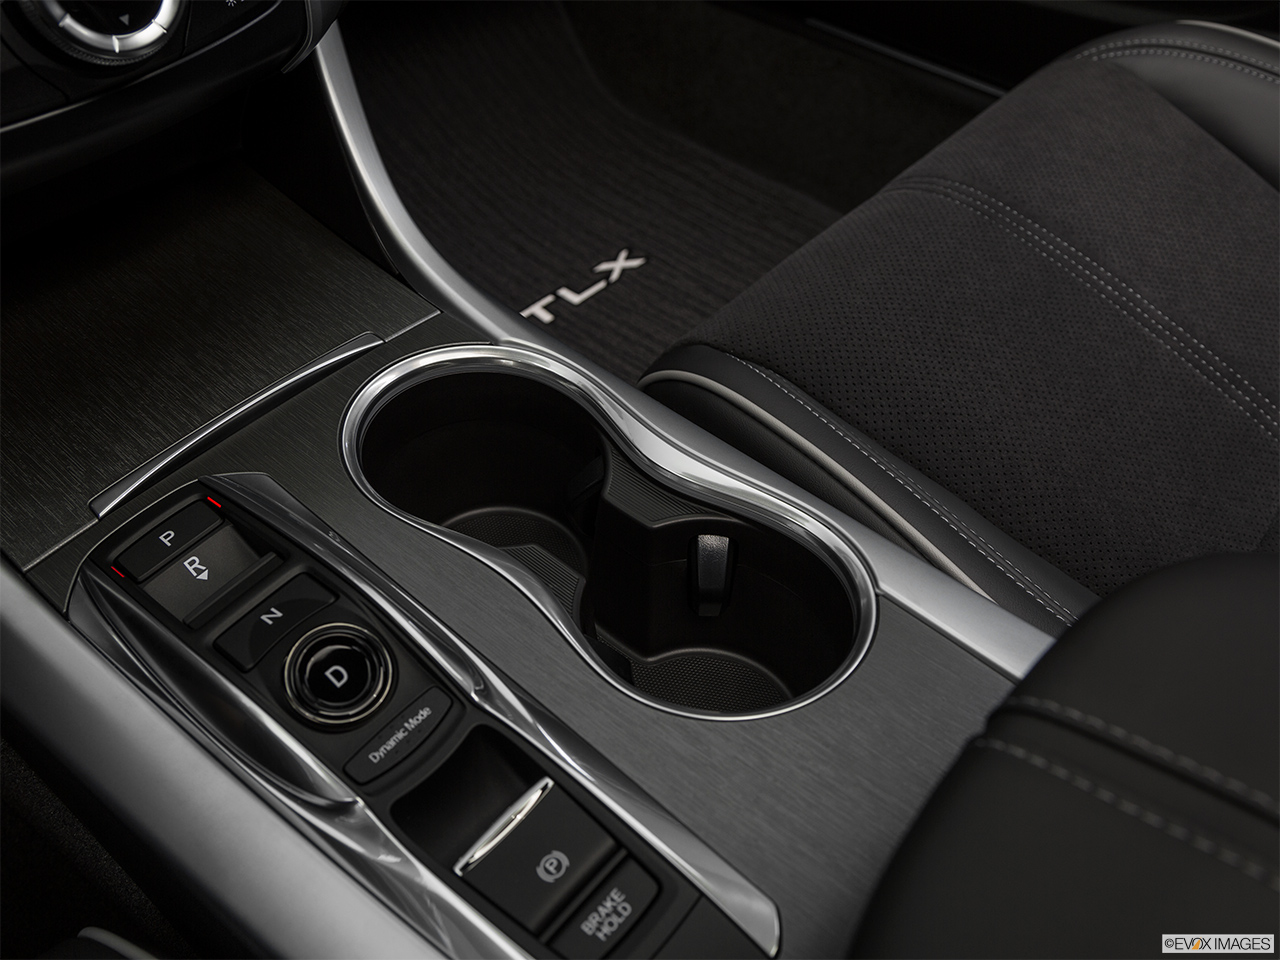 2019 Acura TLX 3.5L Cup holders. 